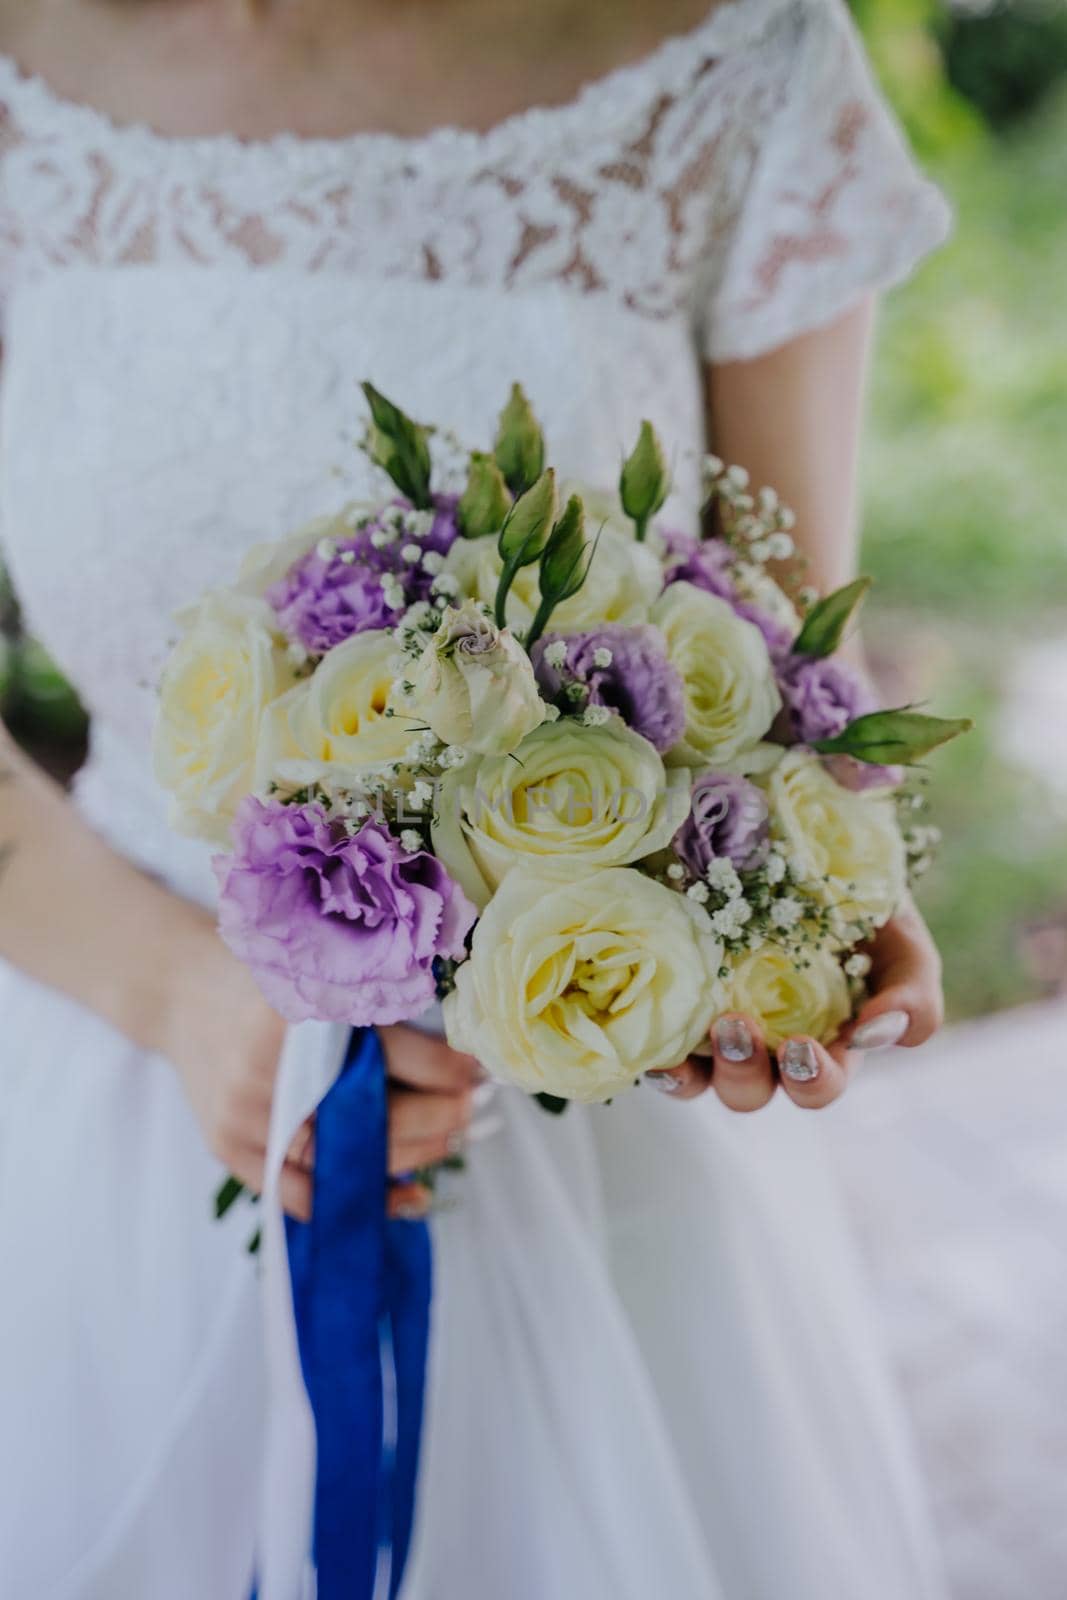 A beautiful and delicate bouquet in the hands of the bride. Bouquet with blue ribbons. Purple eustoma flowers, white roses and gypsophila twigs. Vertical photo.